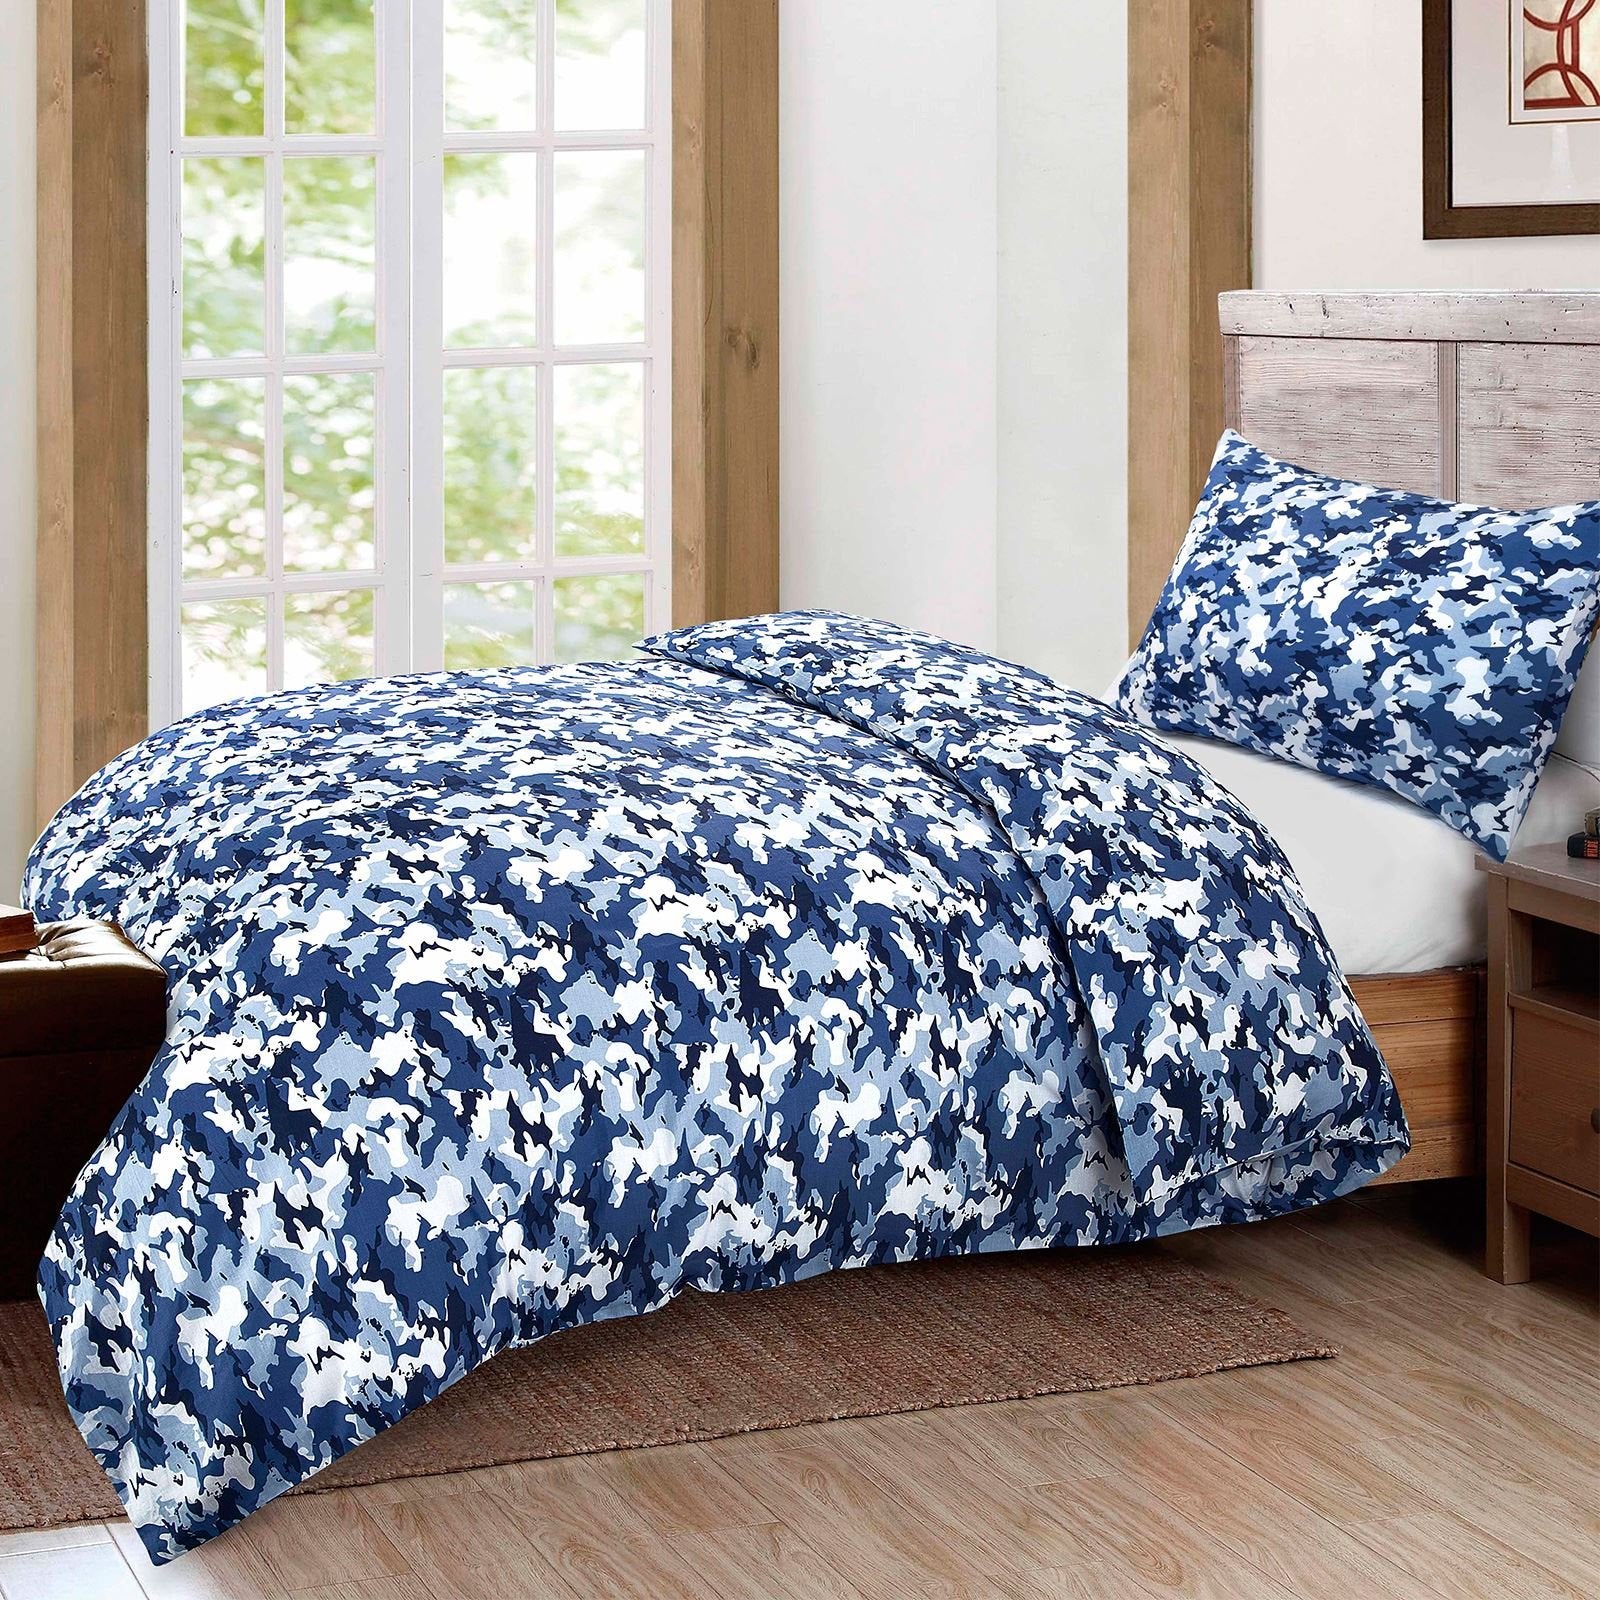 Nimsay Home Camouflage Blue Reversible Duvet Cover and One Pillow Case Bedding Set (Single)